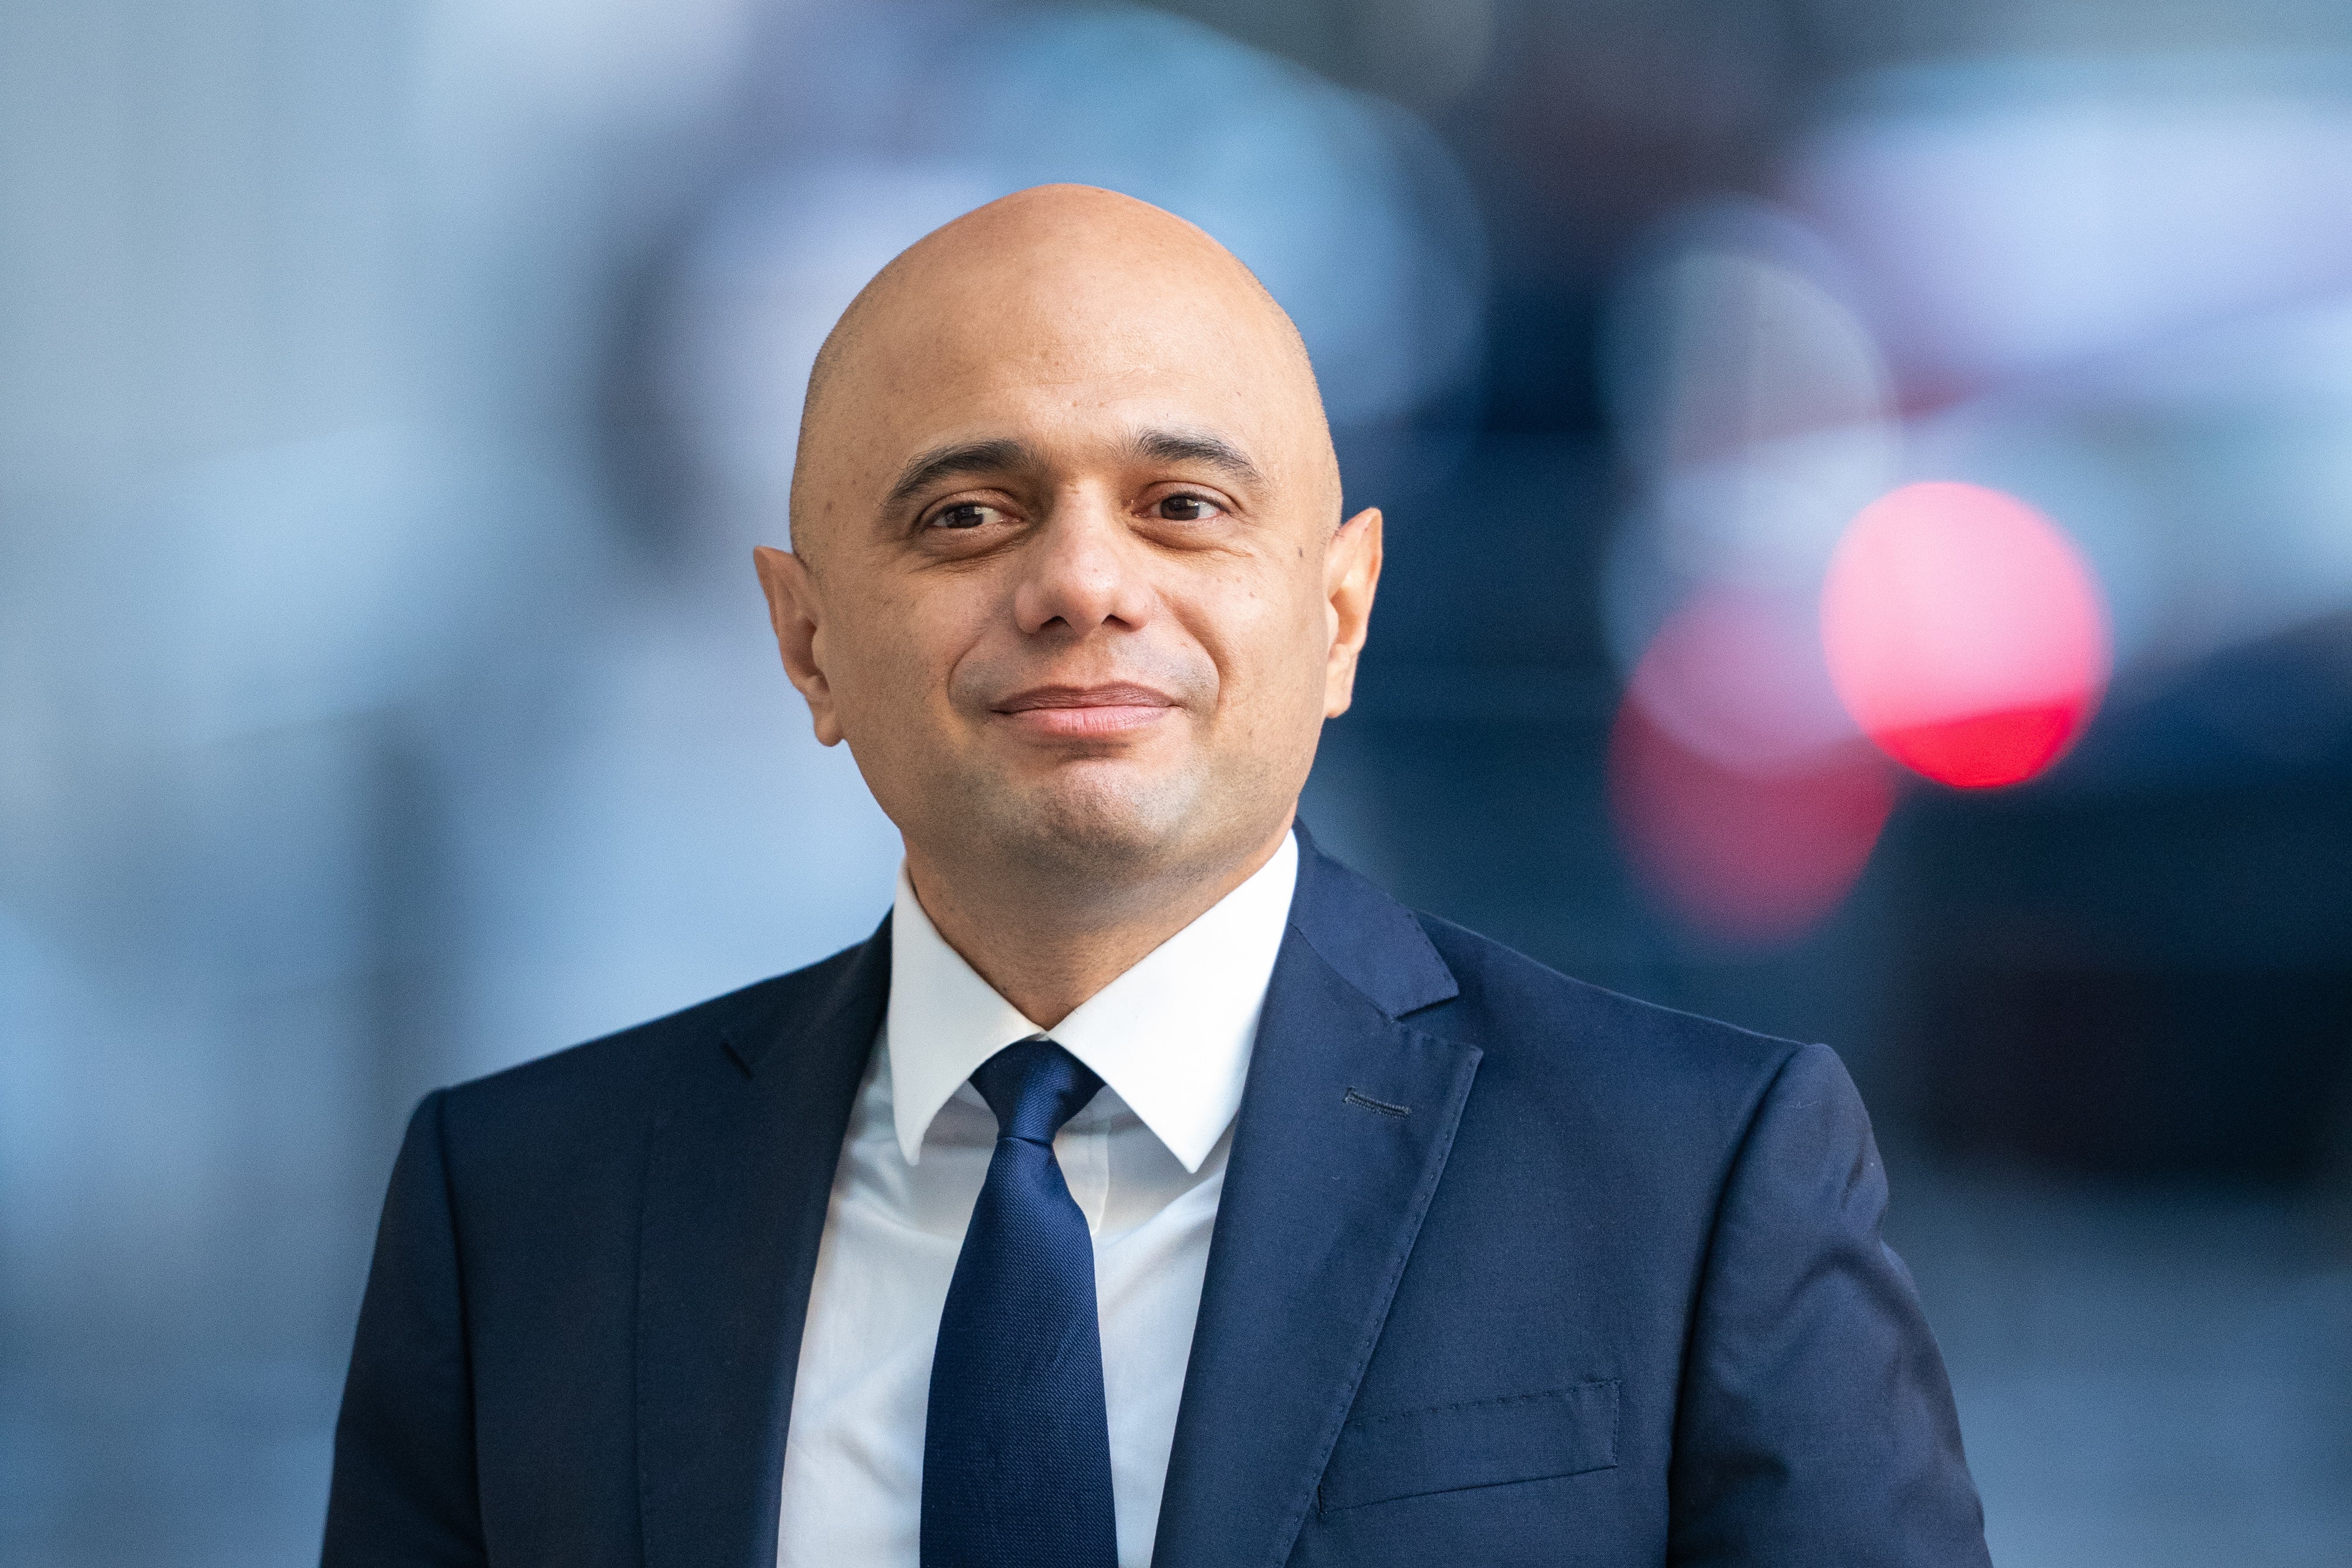 Health Secretary Sajid Javid arrives at BBC Broadcasting House, London, to appear on the BBC1 current affairs programme, The Andrew Marr show, on Sunday.